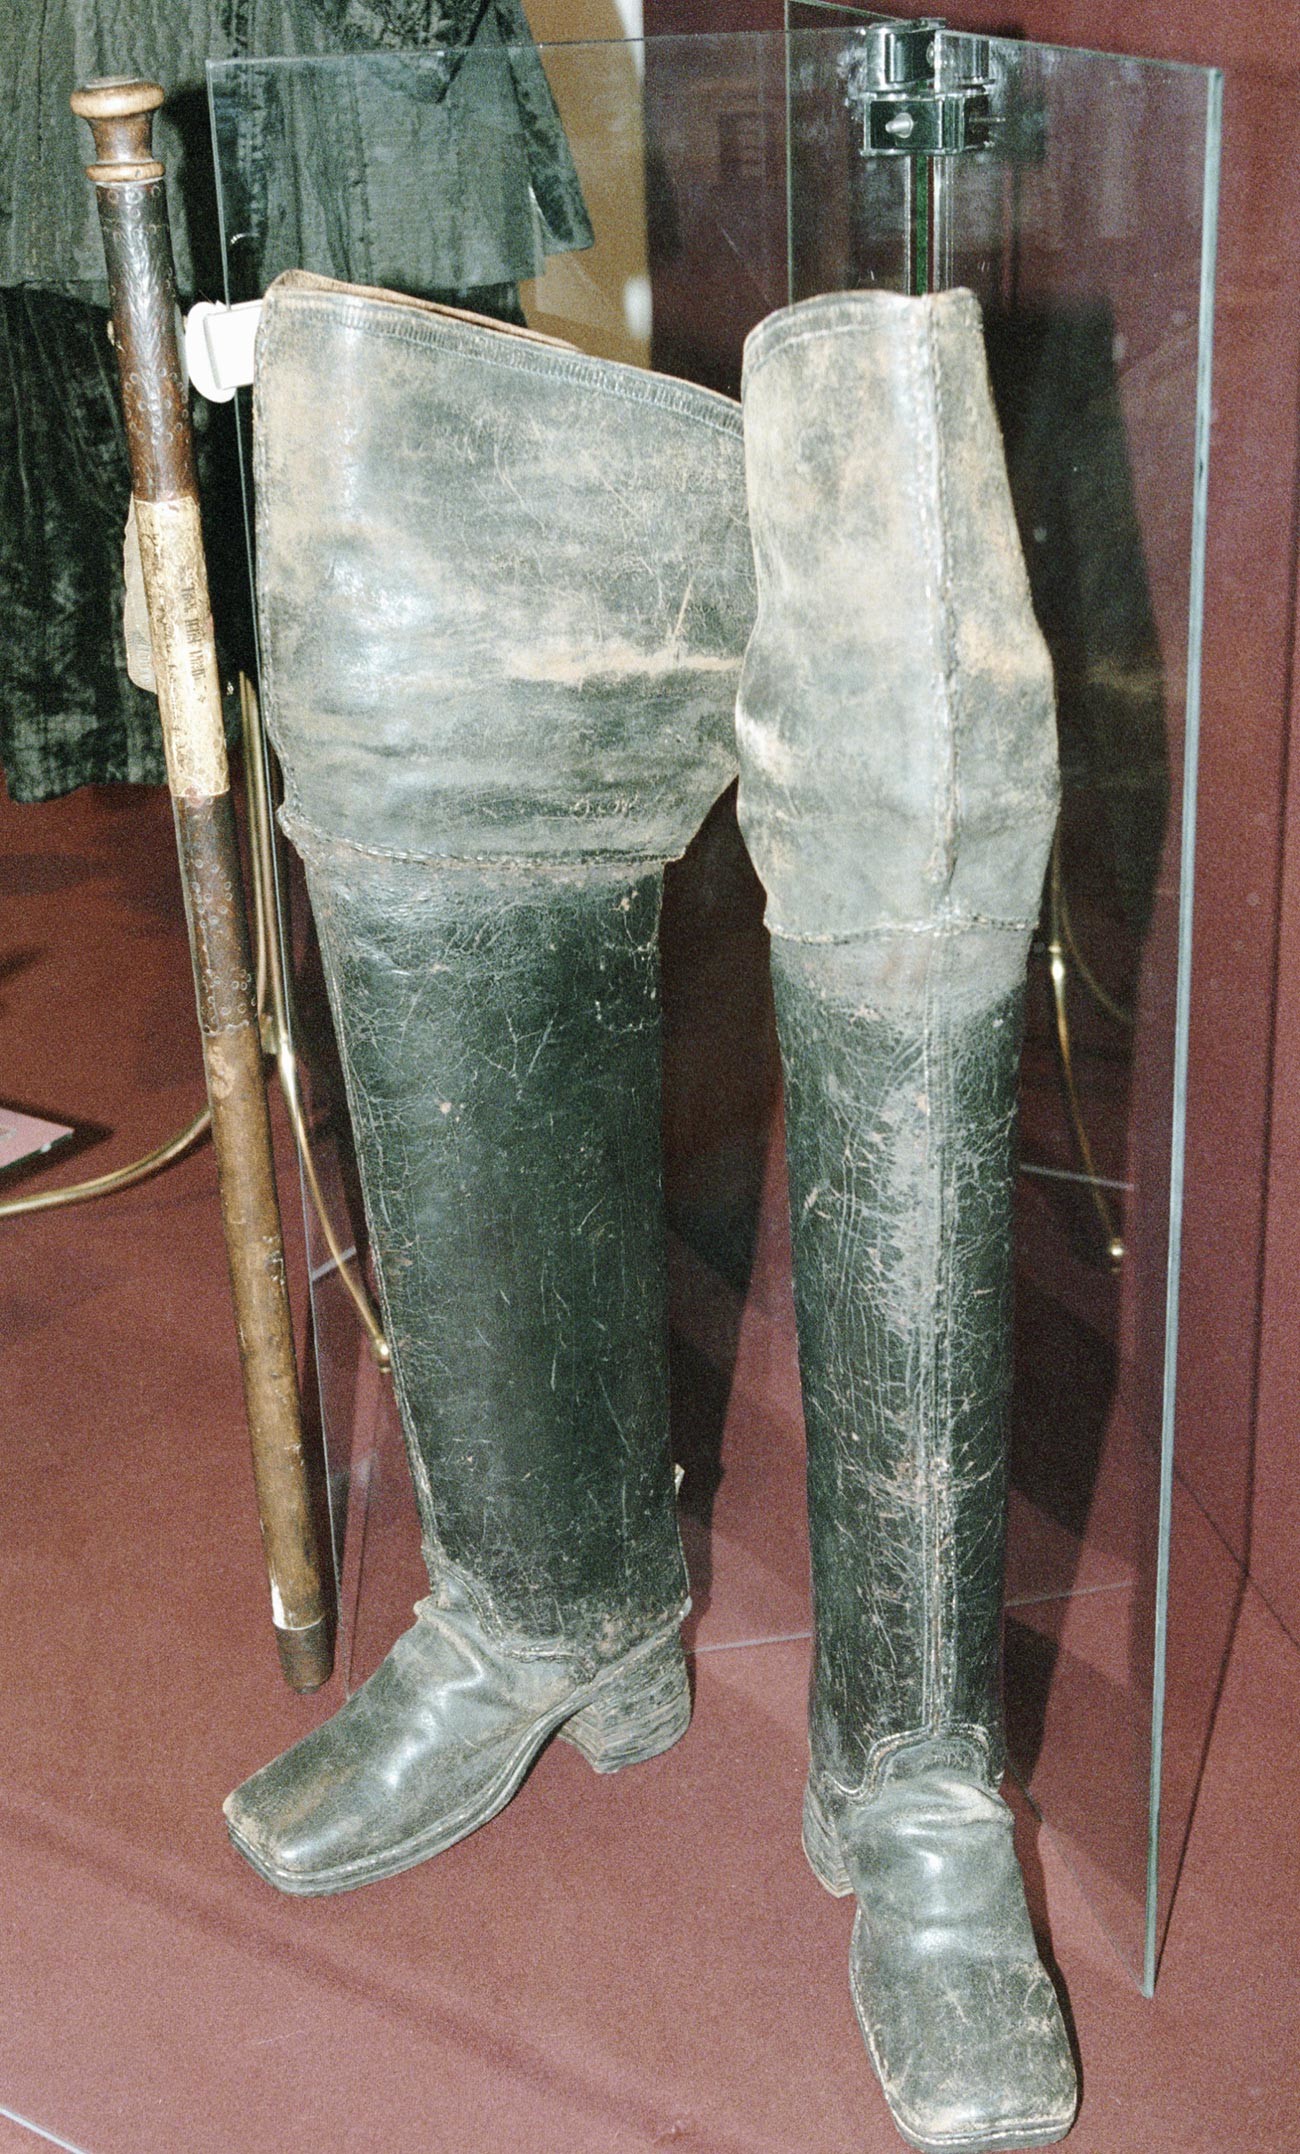 Peter the Great's Hessian boots